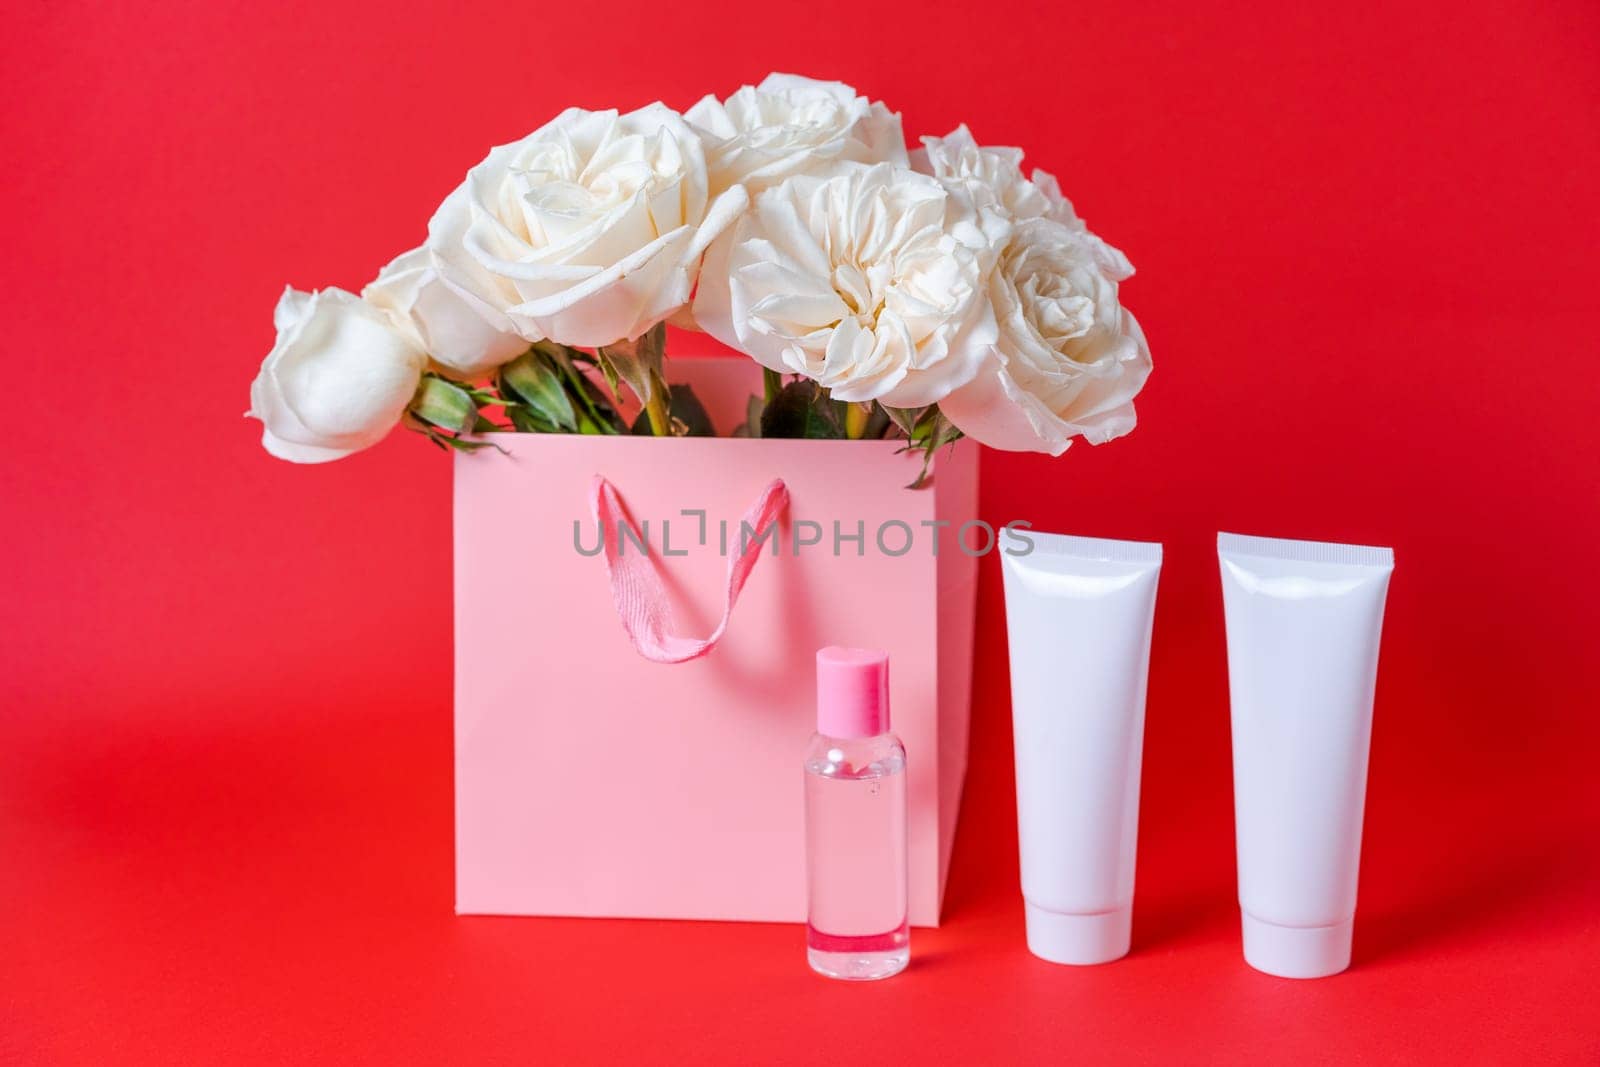 Bouquet white roses and cosmetic white tube for face cream, cleanser or body lotion on red. Moisturizing cosmetic product concept mockup